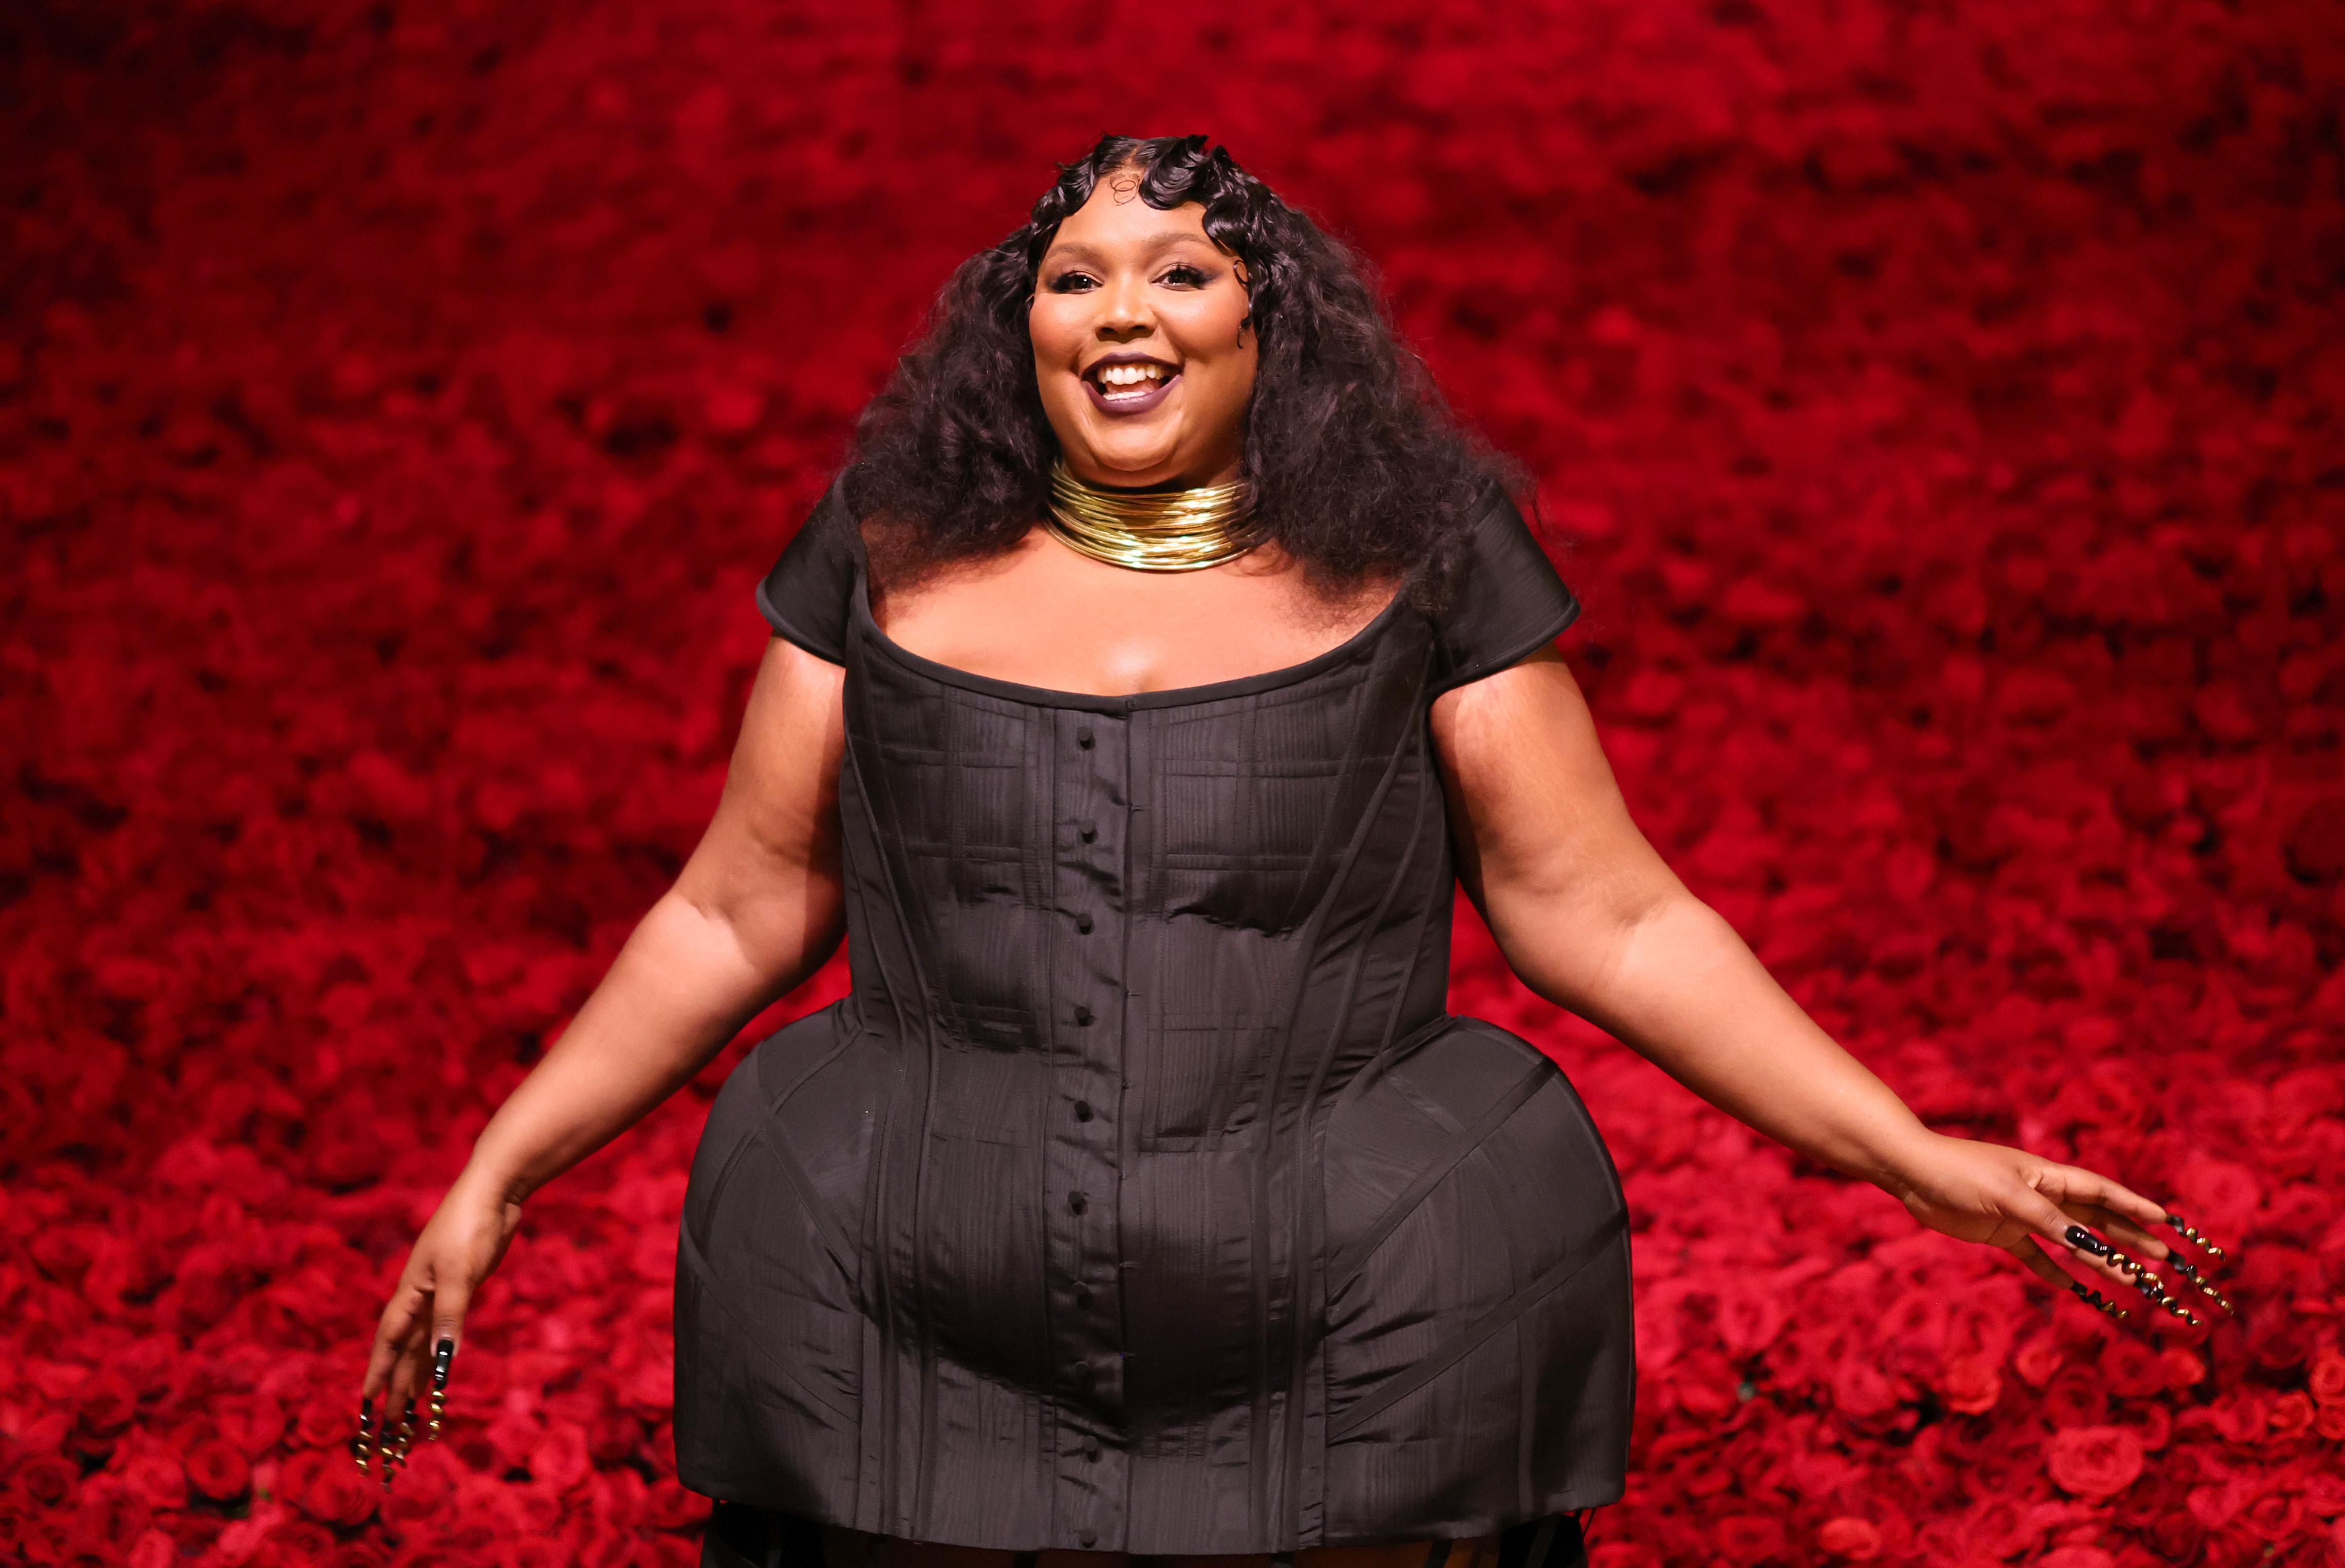 Krystal on X: The most beautiful, Lizzo does nothing but spread positivity  and love but still gets so much hate. @lizzo you are amazing, beautiful,  and a light to this world, my